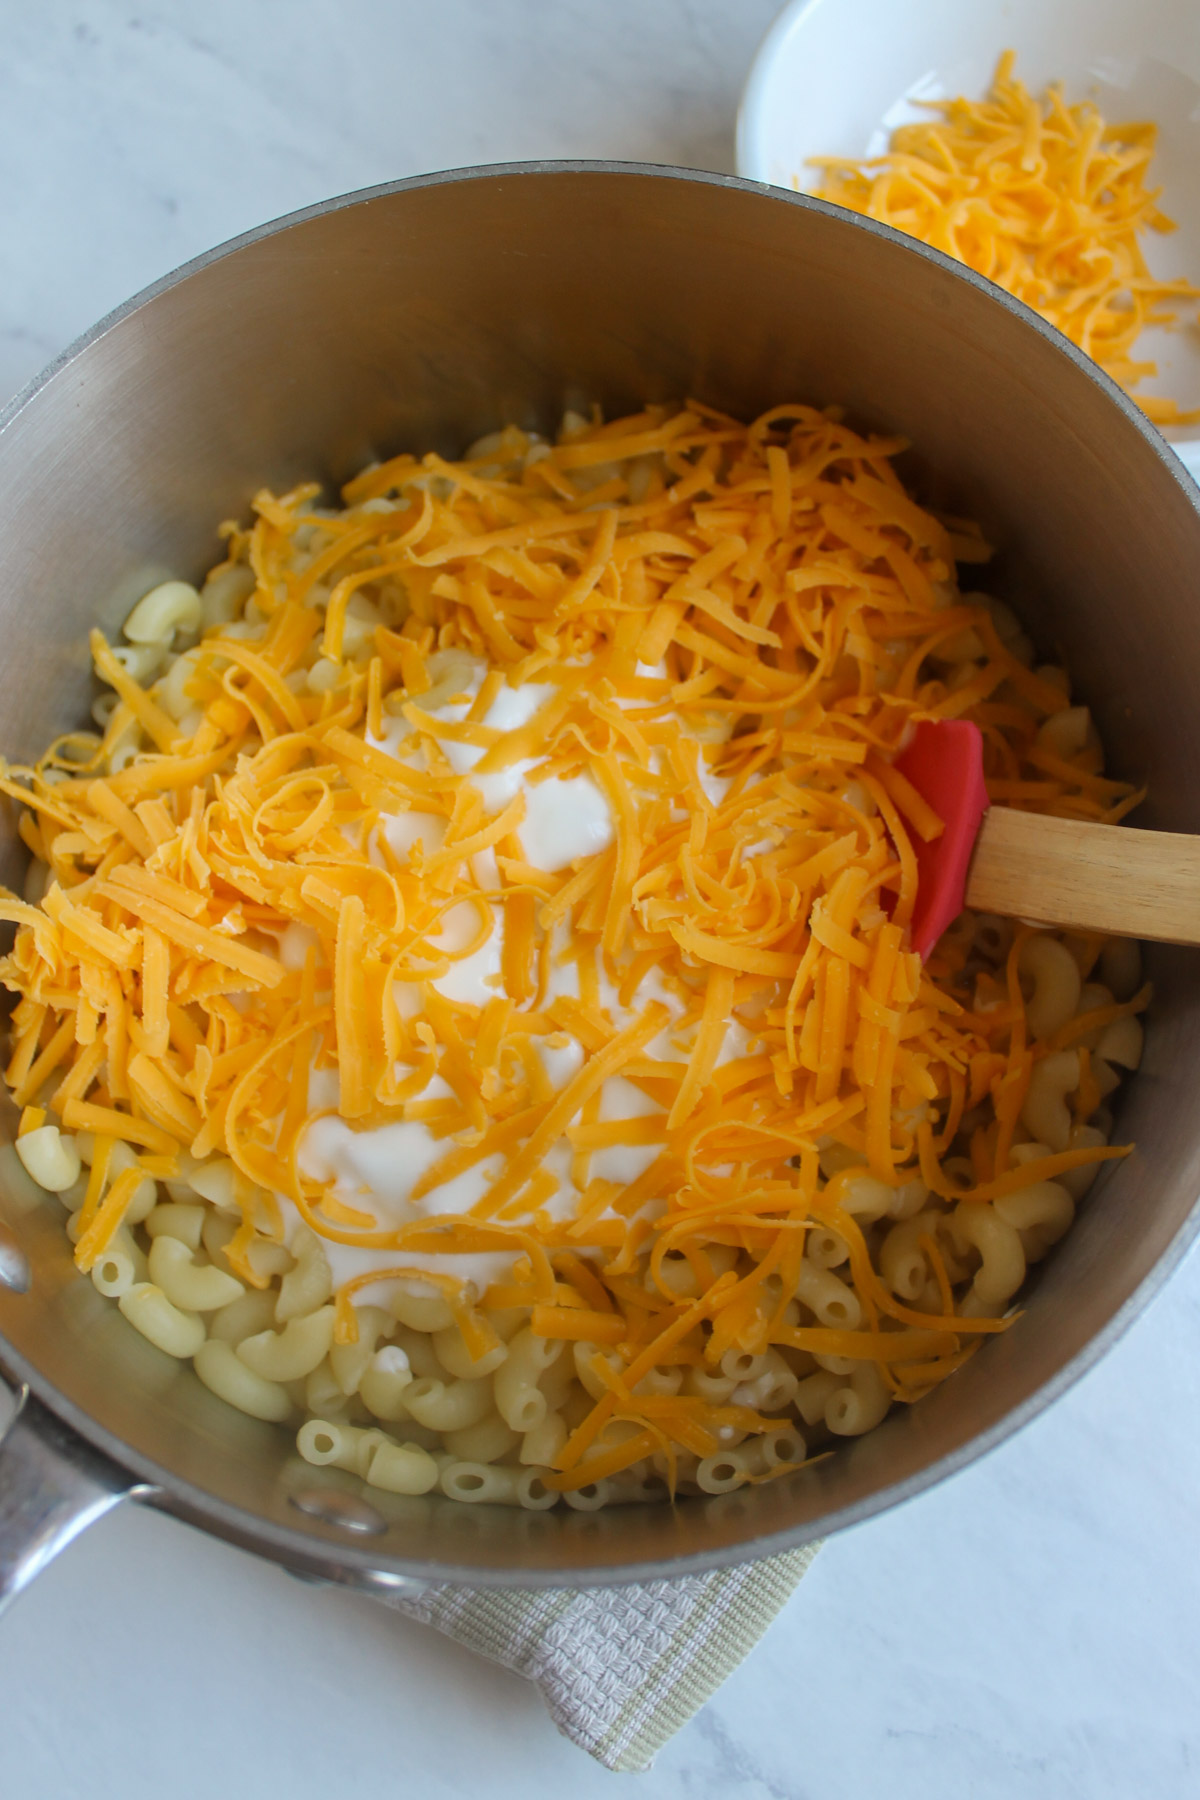 Adding yogurt and shredded cheddar cheese to a pot of boiled macaroni pasta.